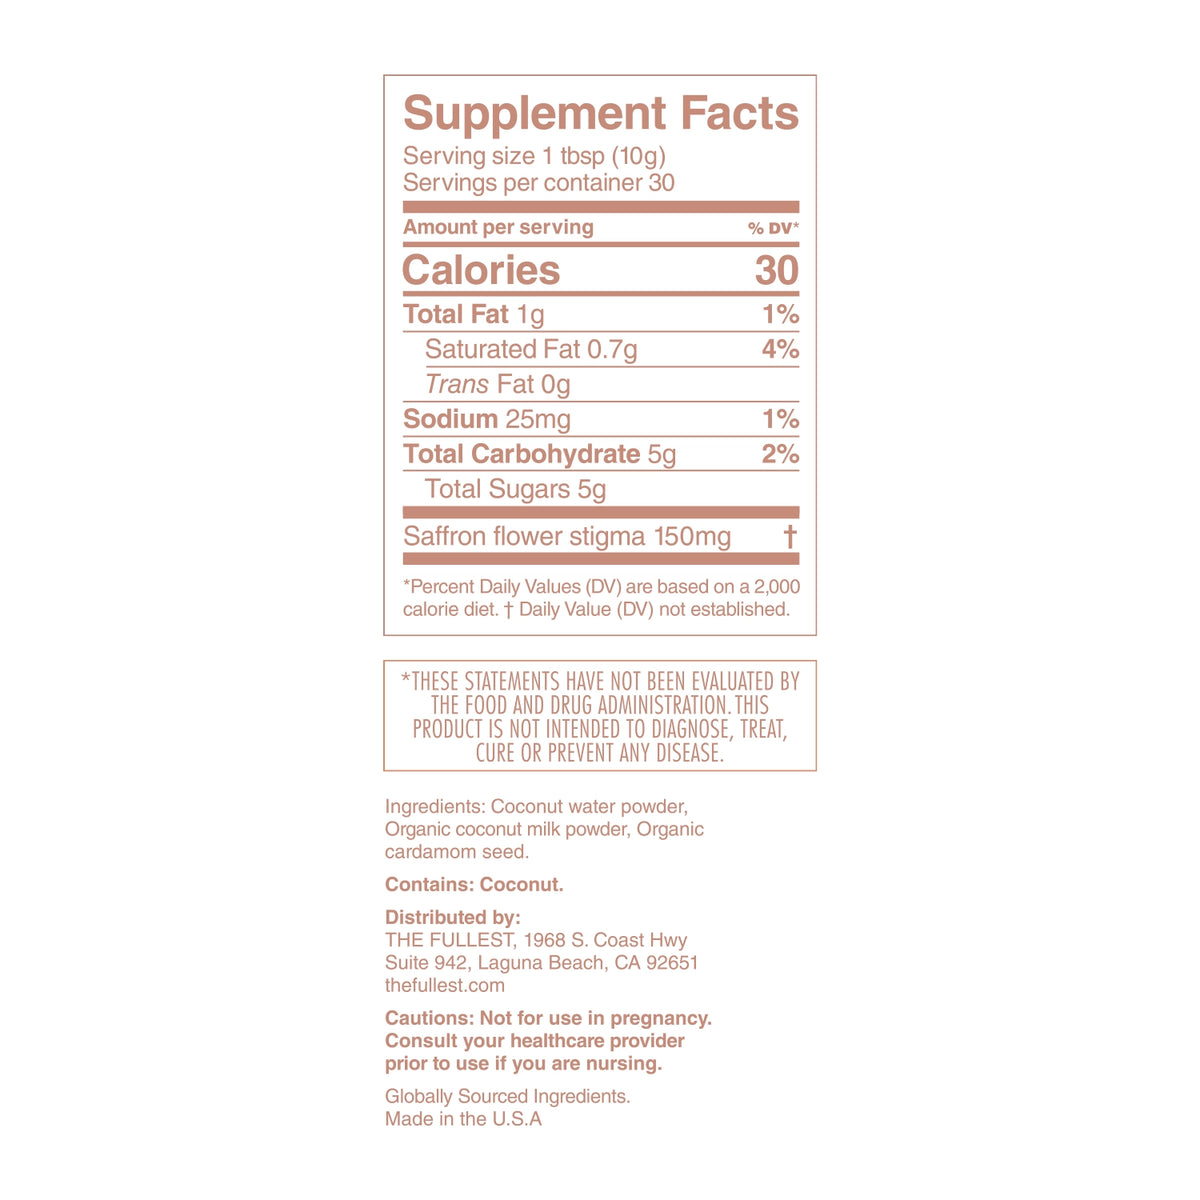 Nutritional information label for Warm Feelings Bag from THE FULLEST, displaying serving size, calories, and dietary contents for the food product, with a disclaimer and list of sourced ingredients.